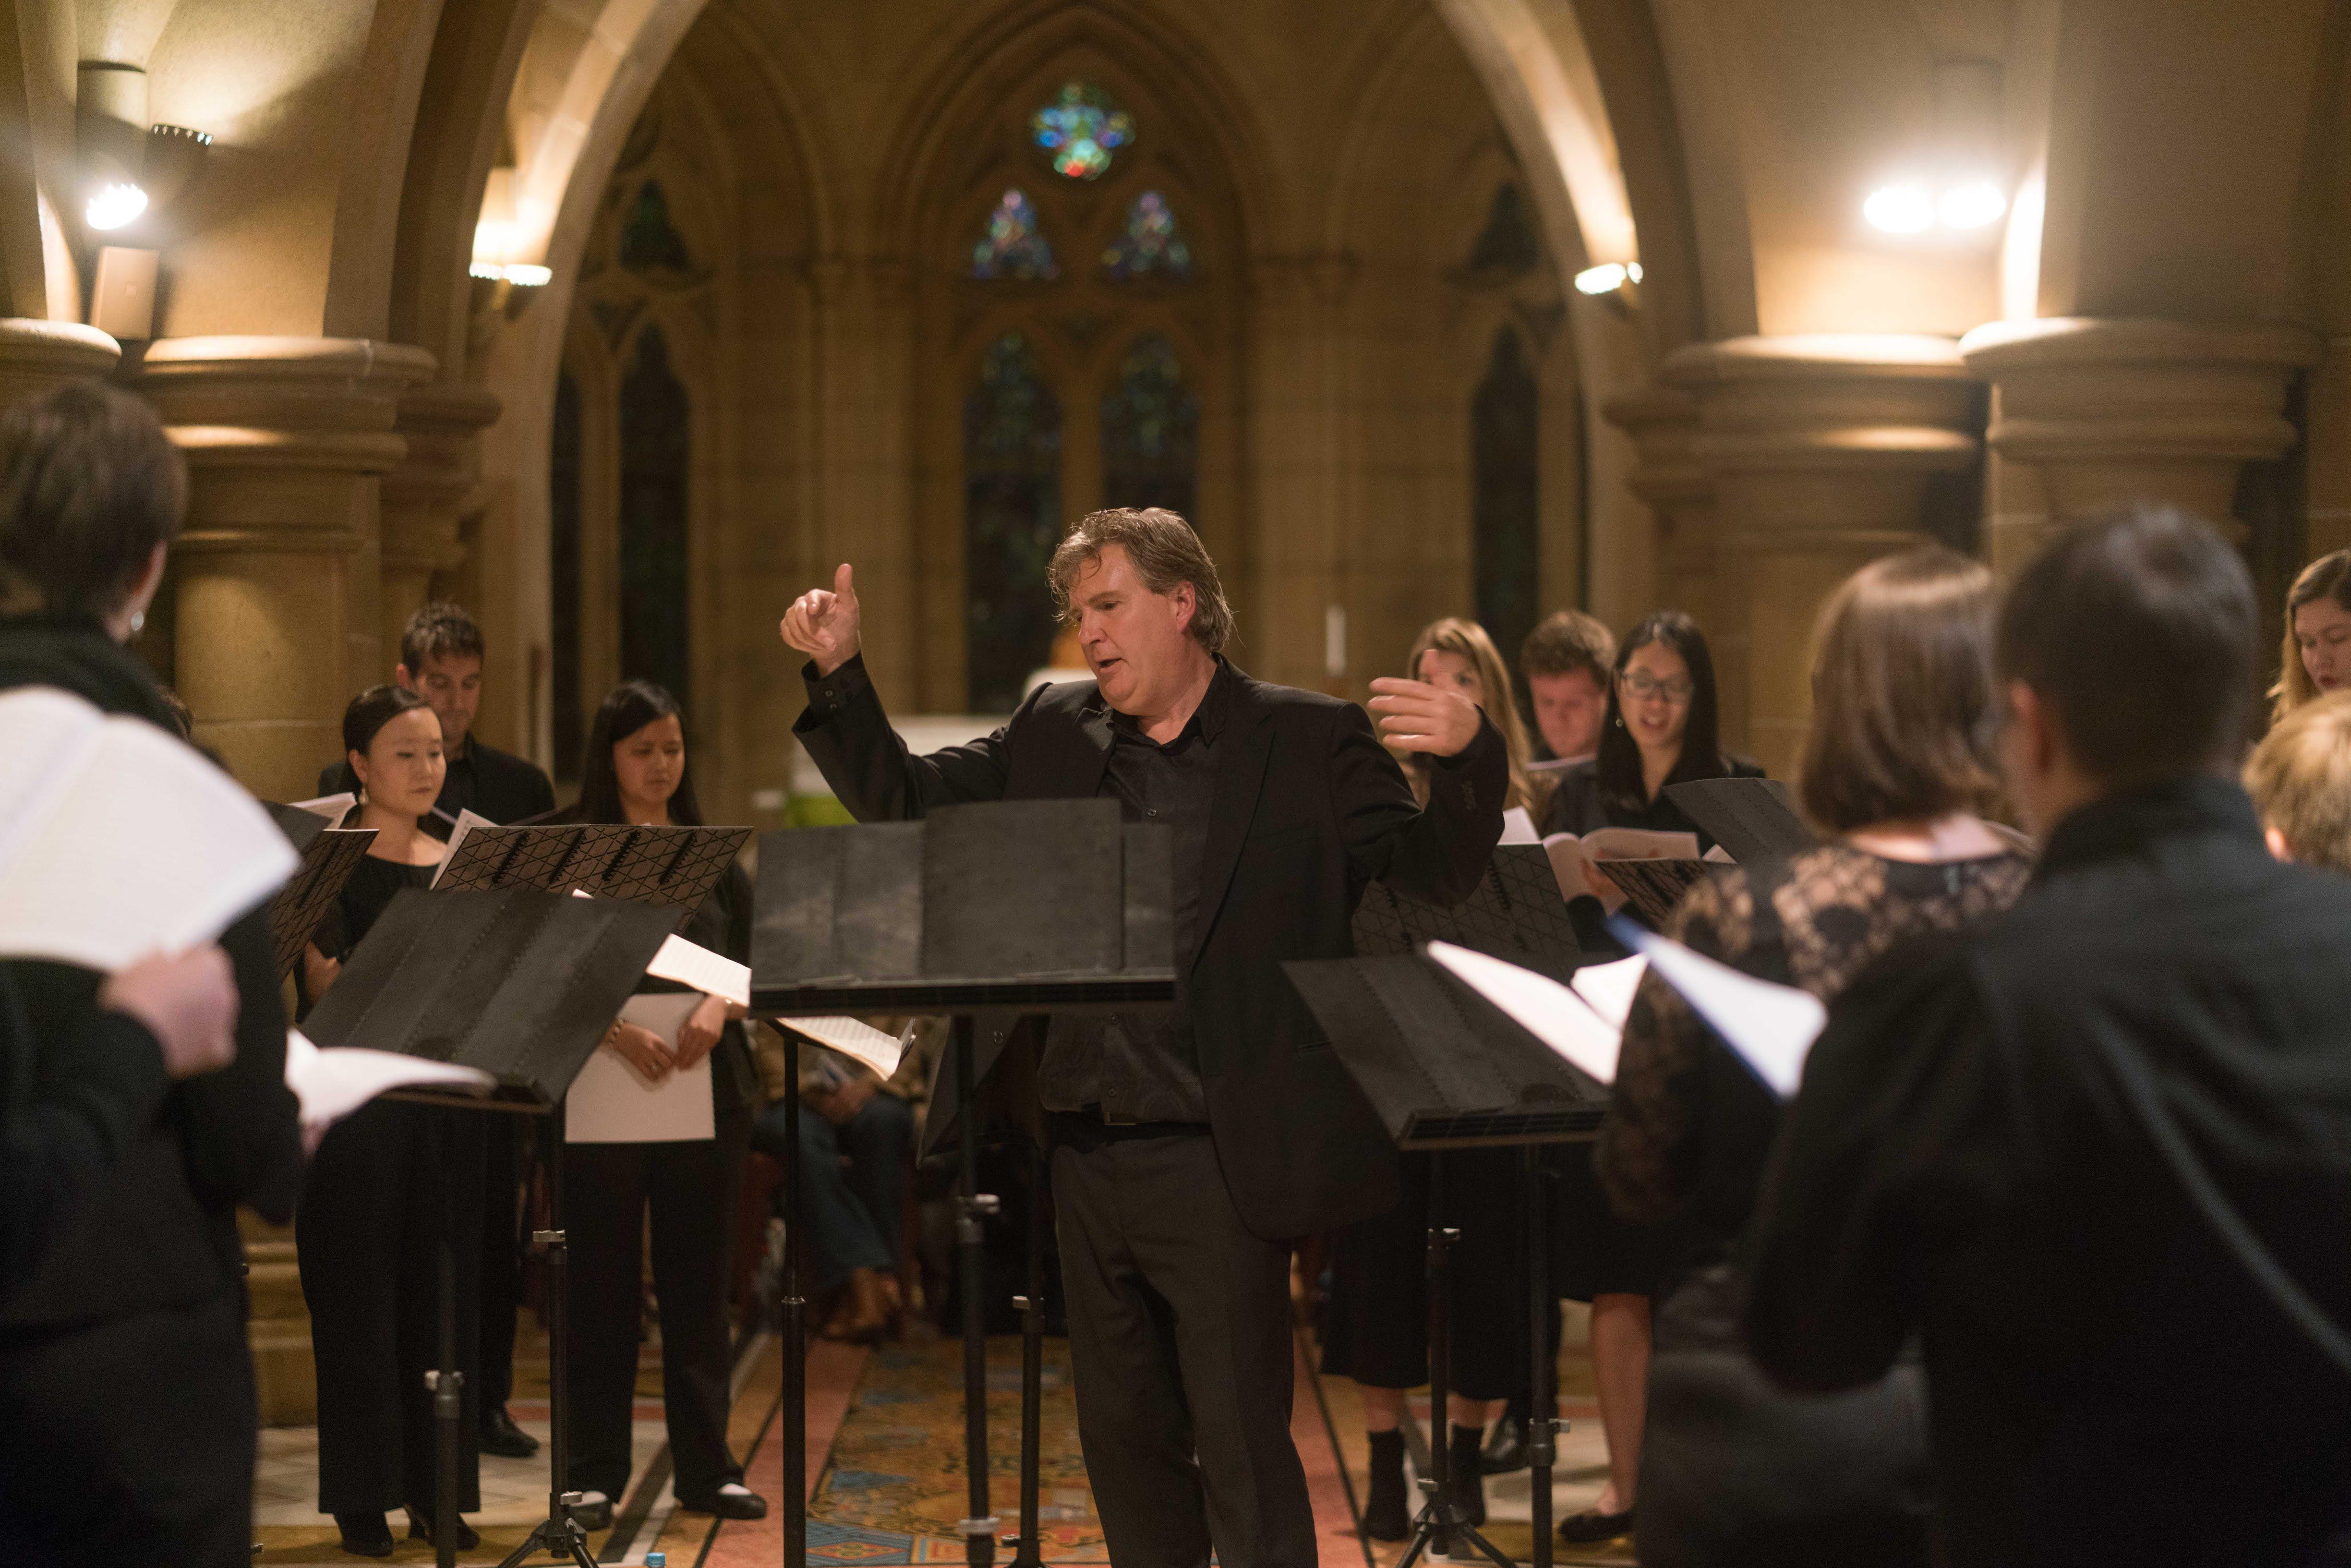 Performing with The SongCo Chorale in the Crypt of St Mary's Cathedral, Sydney